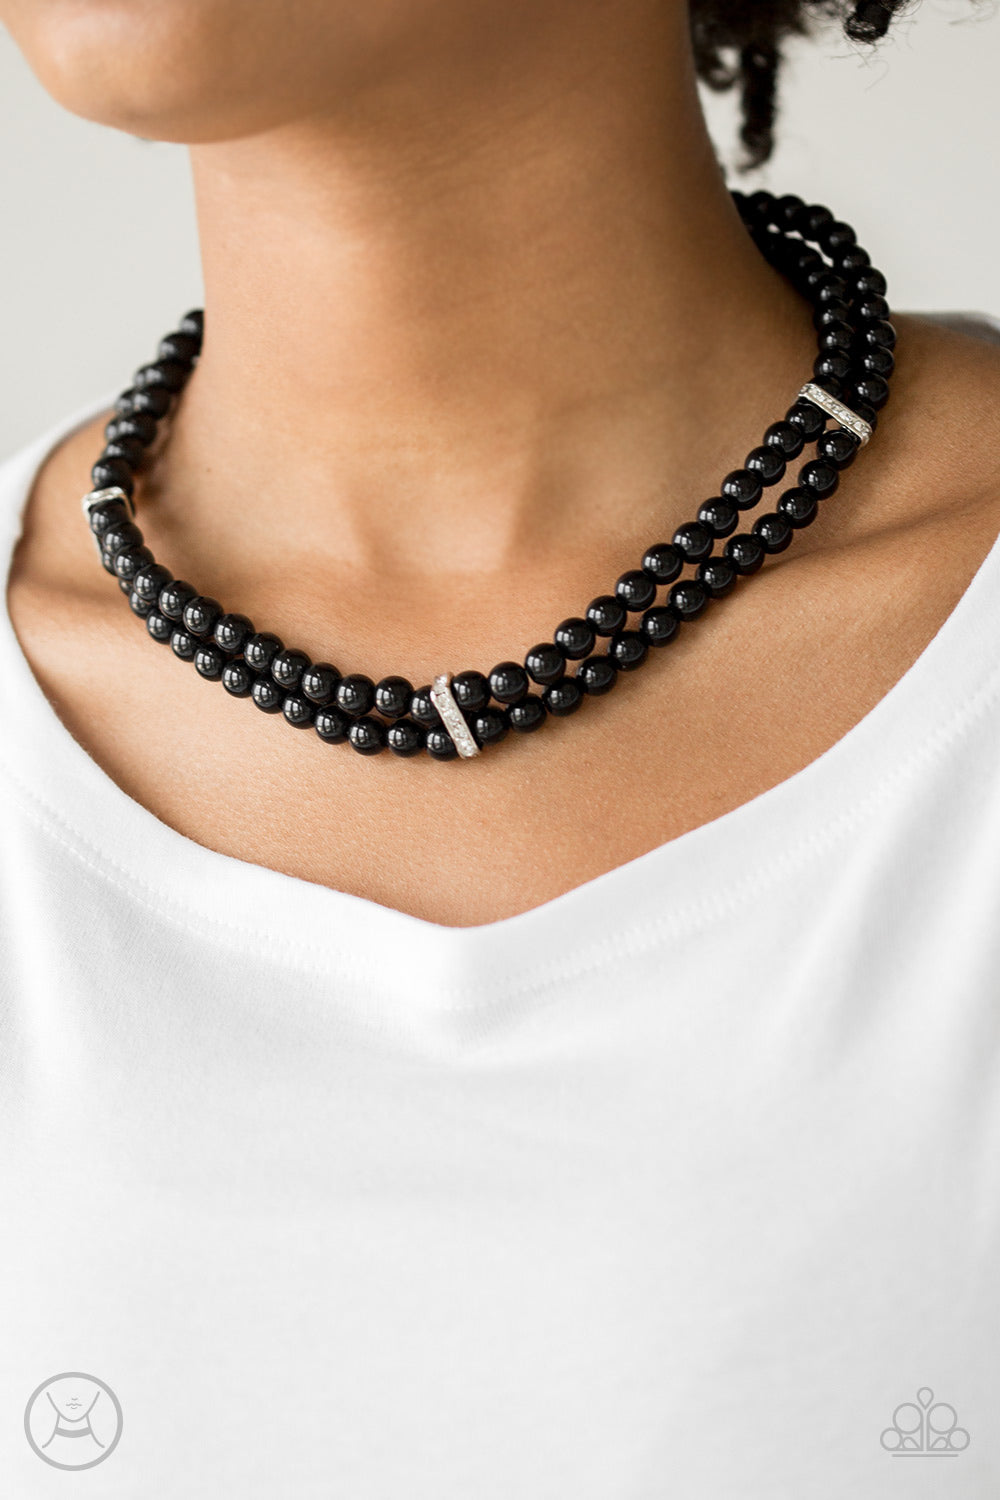 Put On Your Party Dress Black Necklace